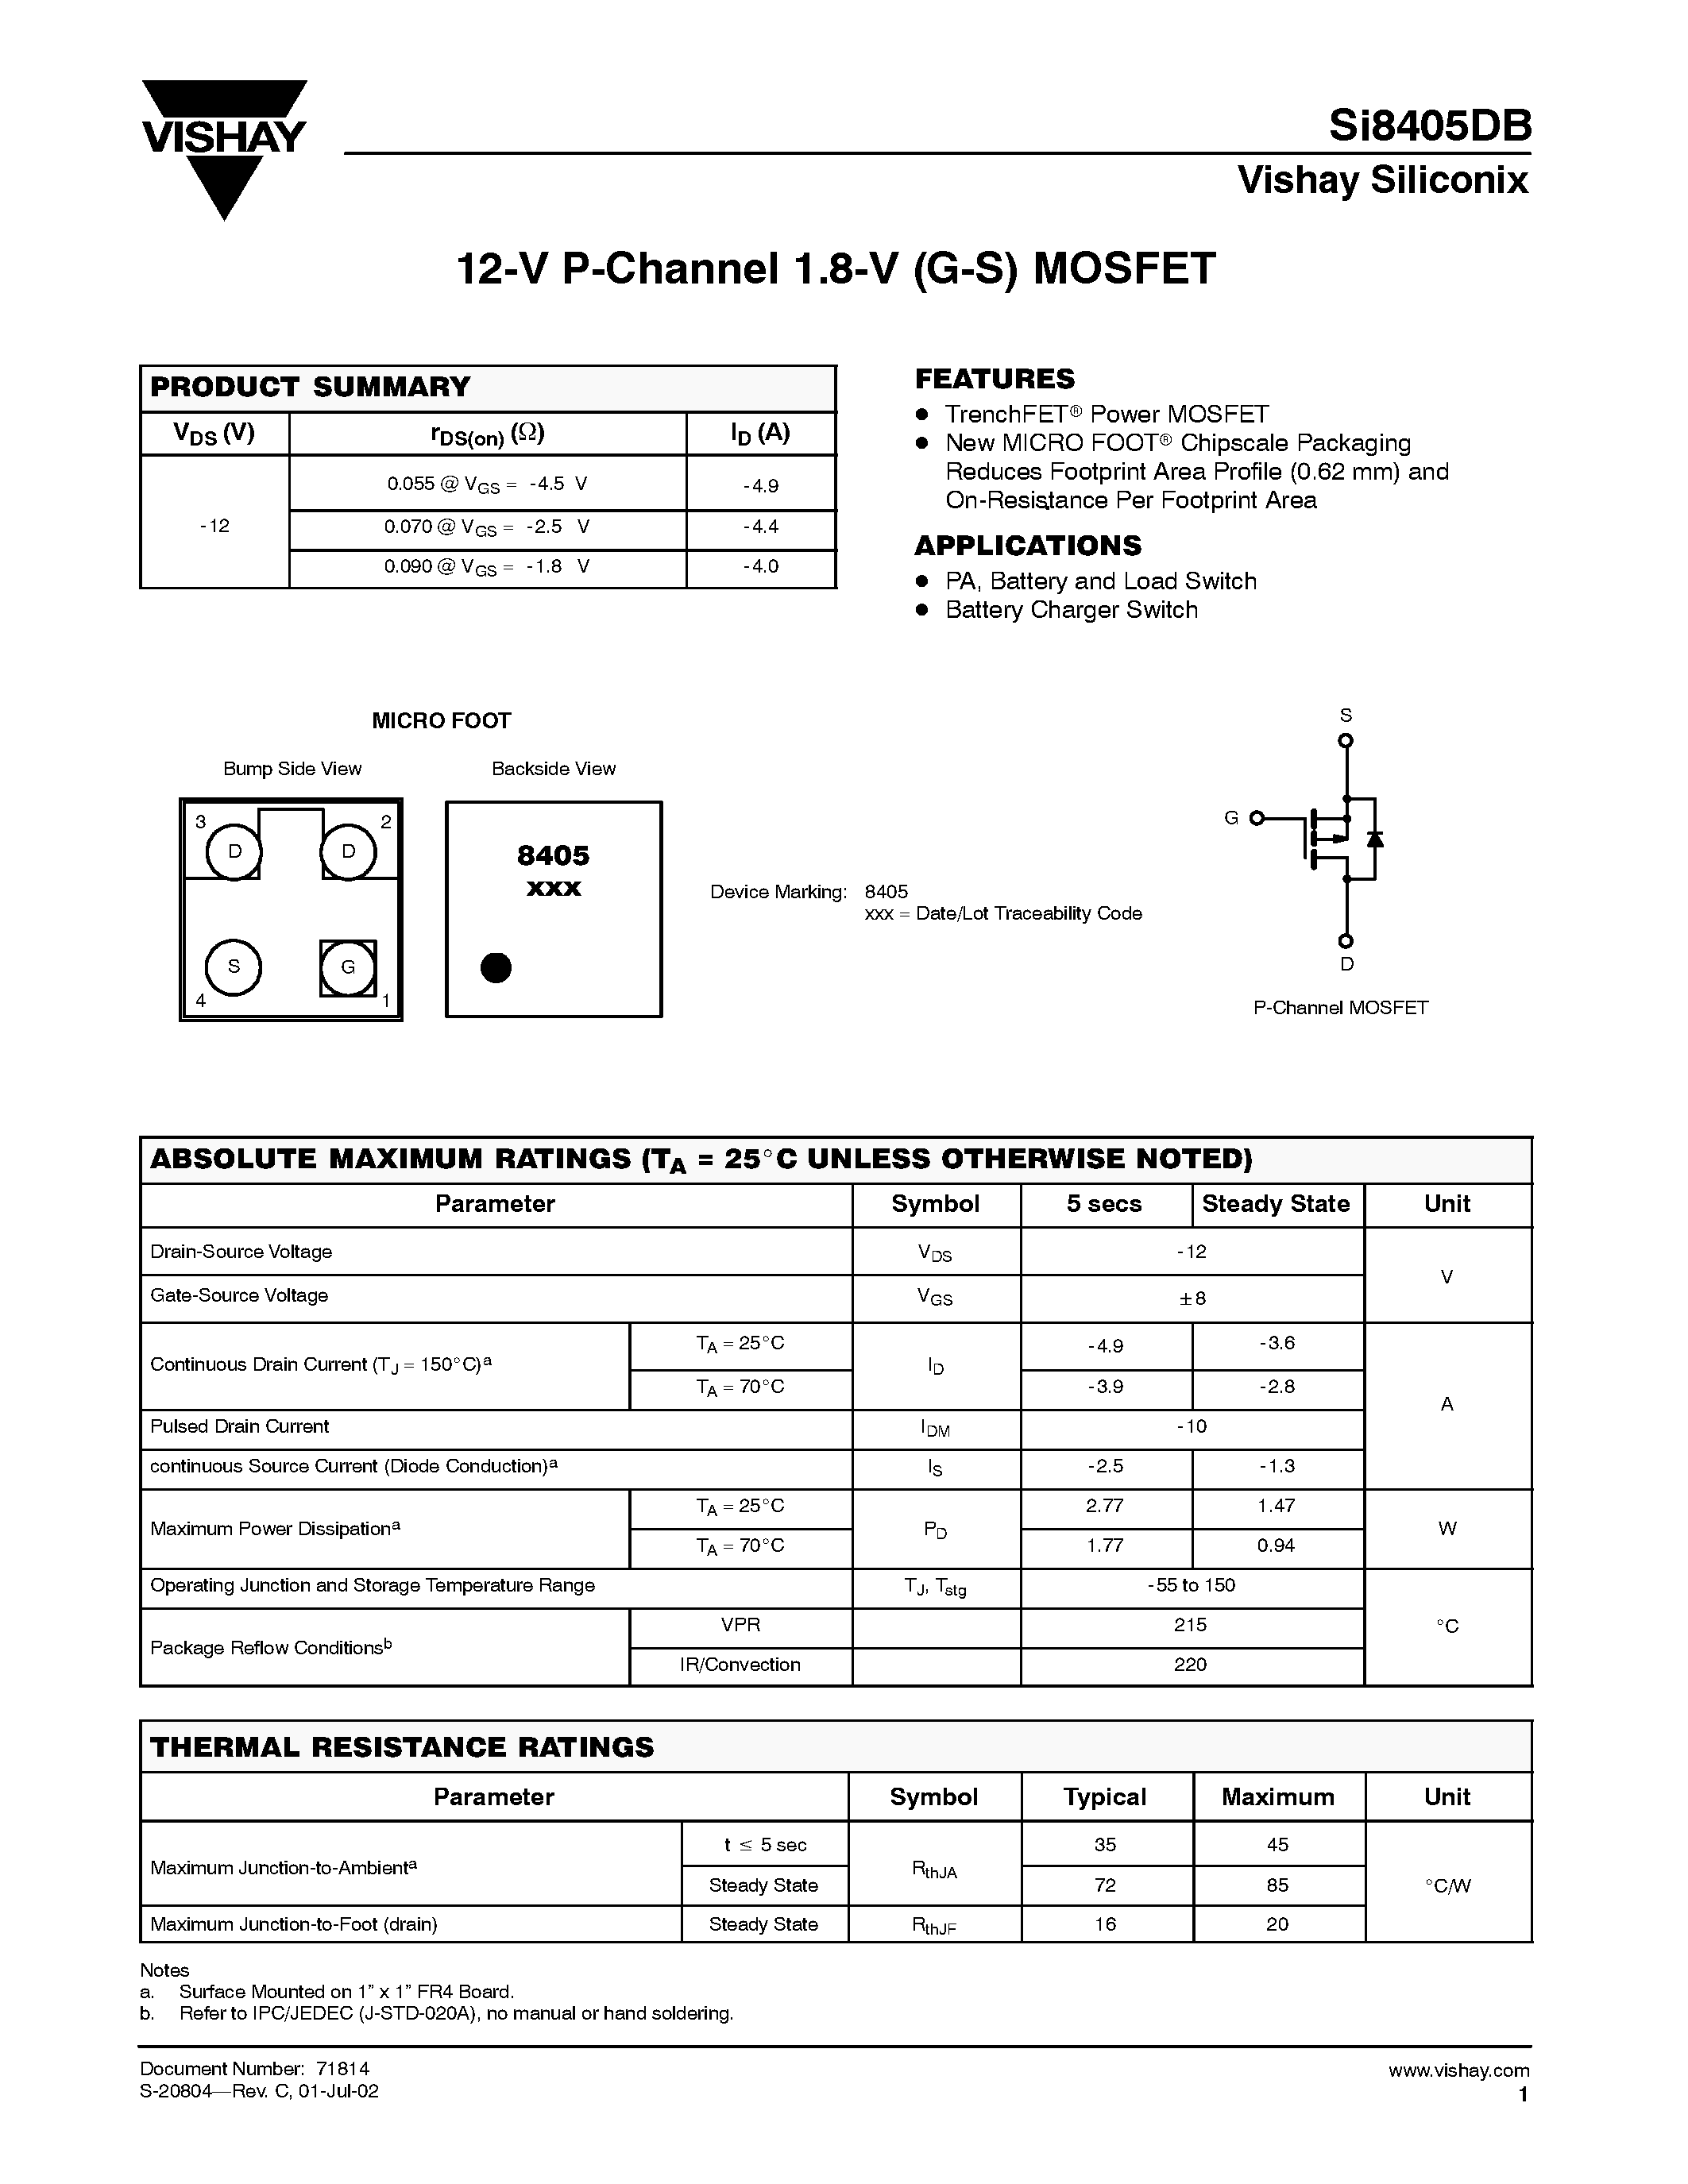 Datasheet SI8405DB - 12-V P-Channel 1.8-V (G-S) MOSFET page 1